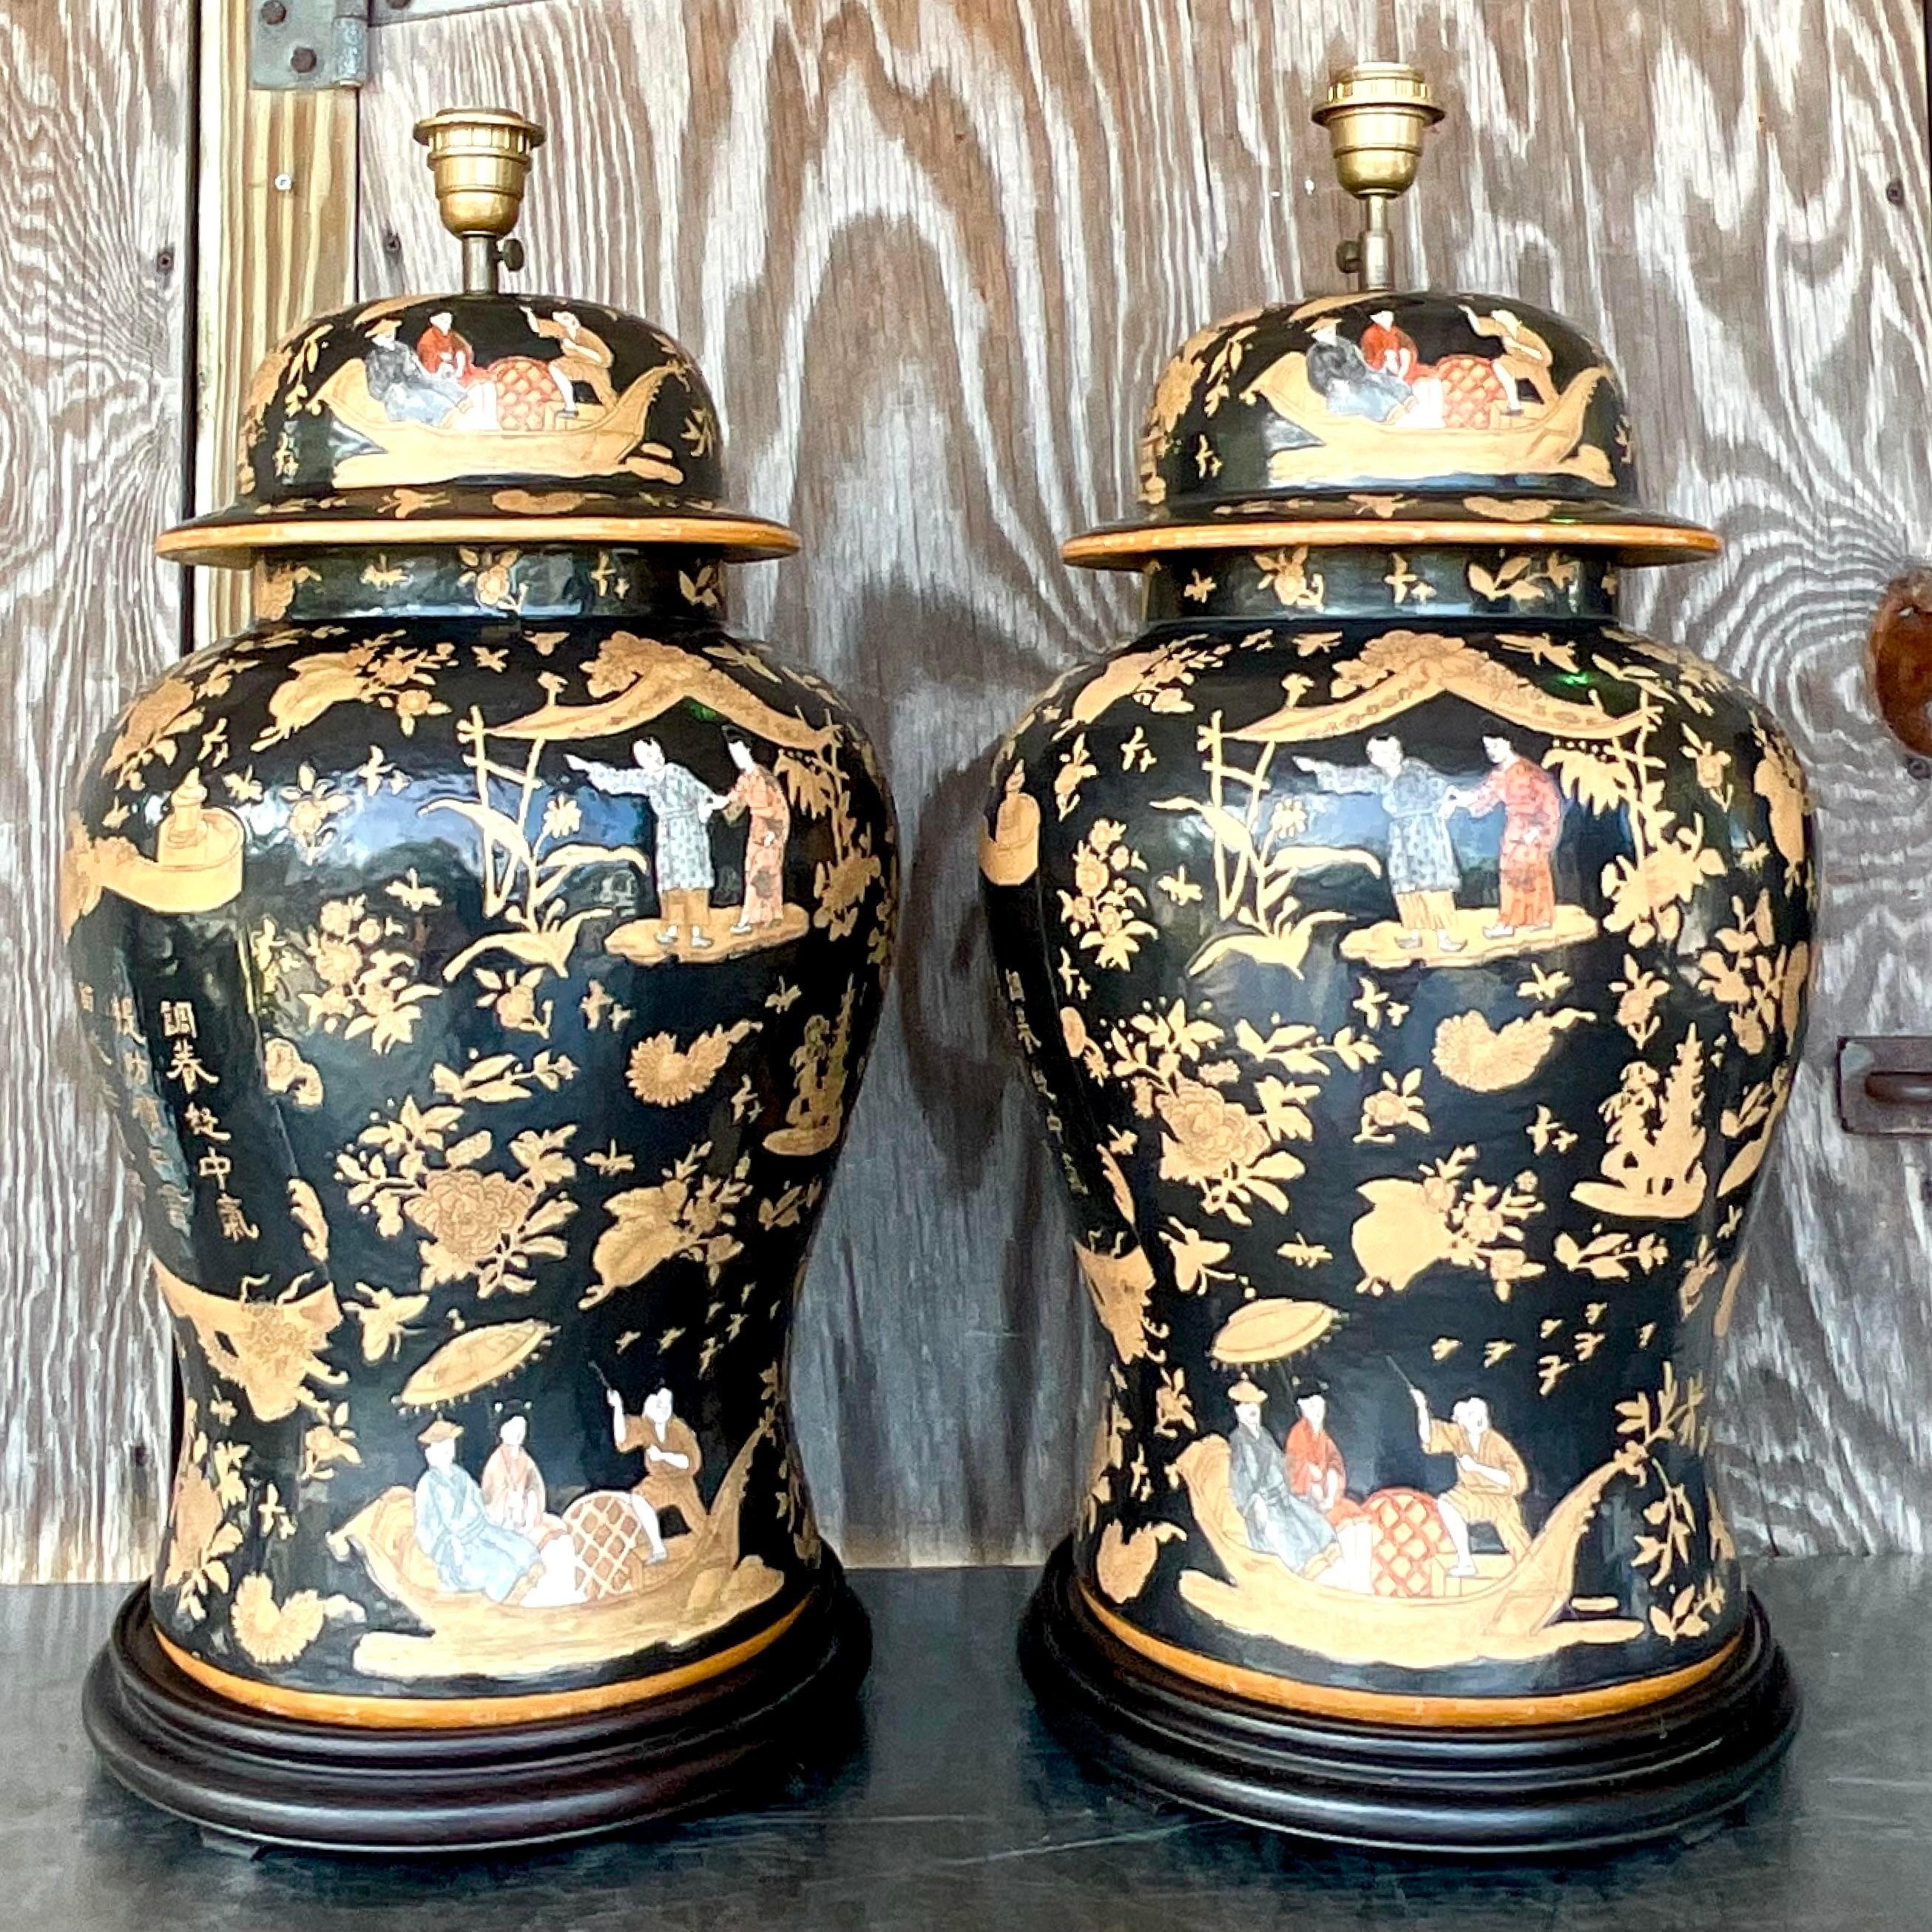 Metal Vintage Asian Monumental Chinoiserie Ginger Jars Lamps - a Pair